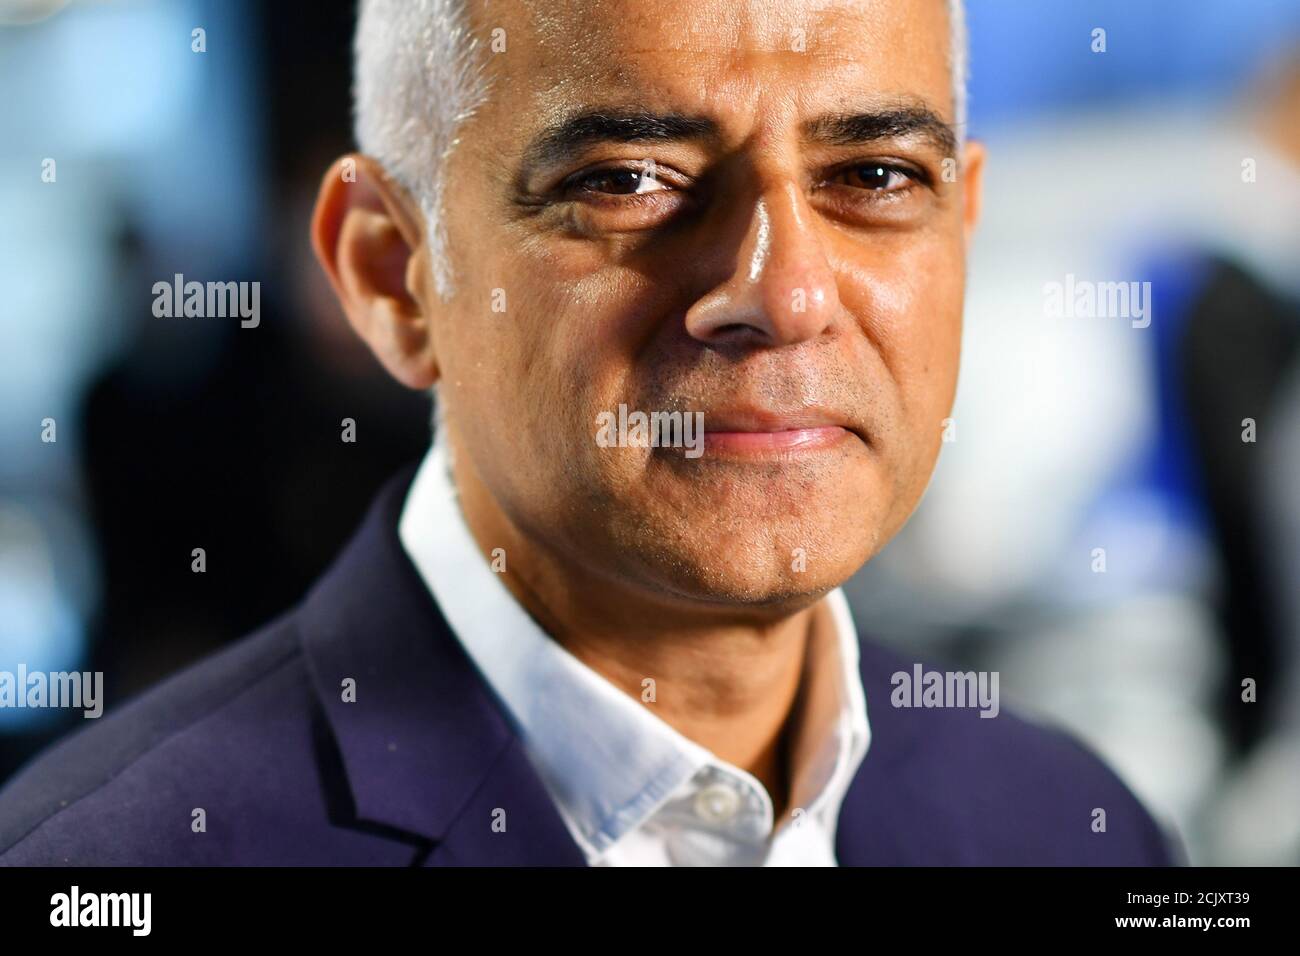 Mayor of London Sadiq Khan poses during an interview with Reuters at an event to promote the start of London Tech Week, in London, Britain, June 10, 2019.  REUTERS/Dylan Martinez Stock Photo